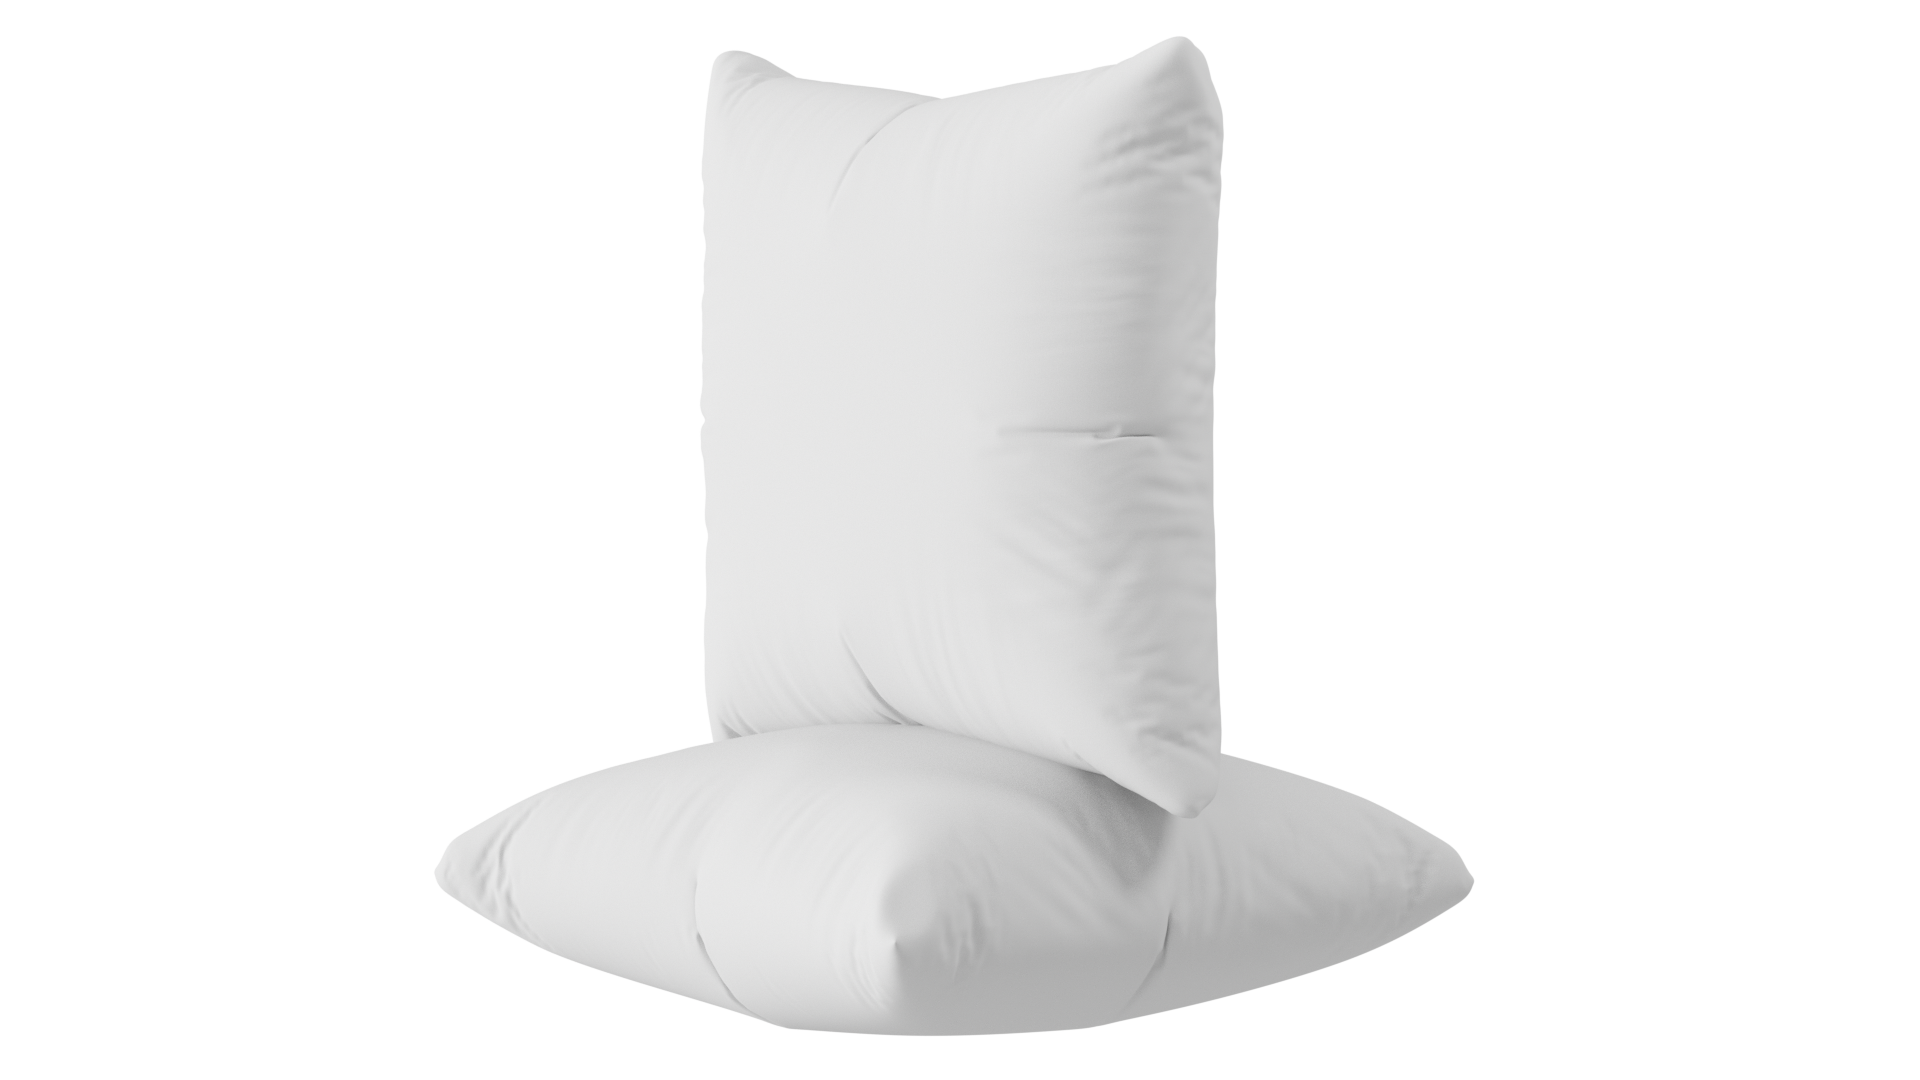 Utopia Bedding Throw Pillows Insert (Pack of 2, White) - 18 x 18 Inches Bed